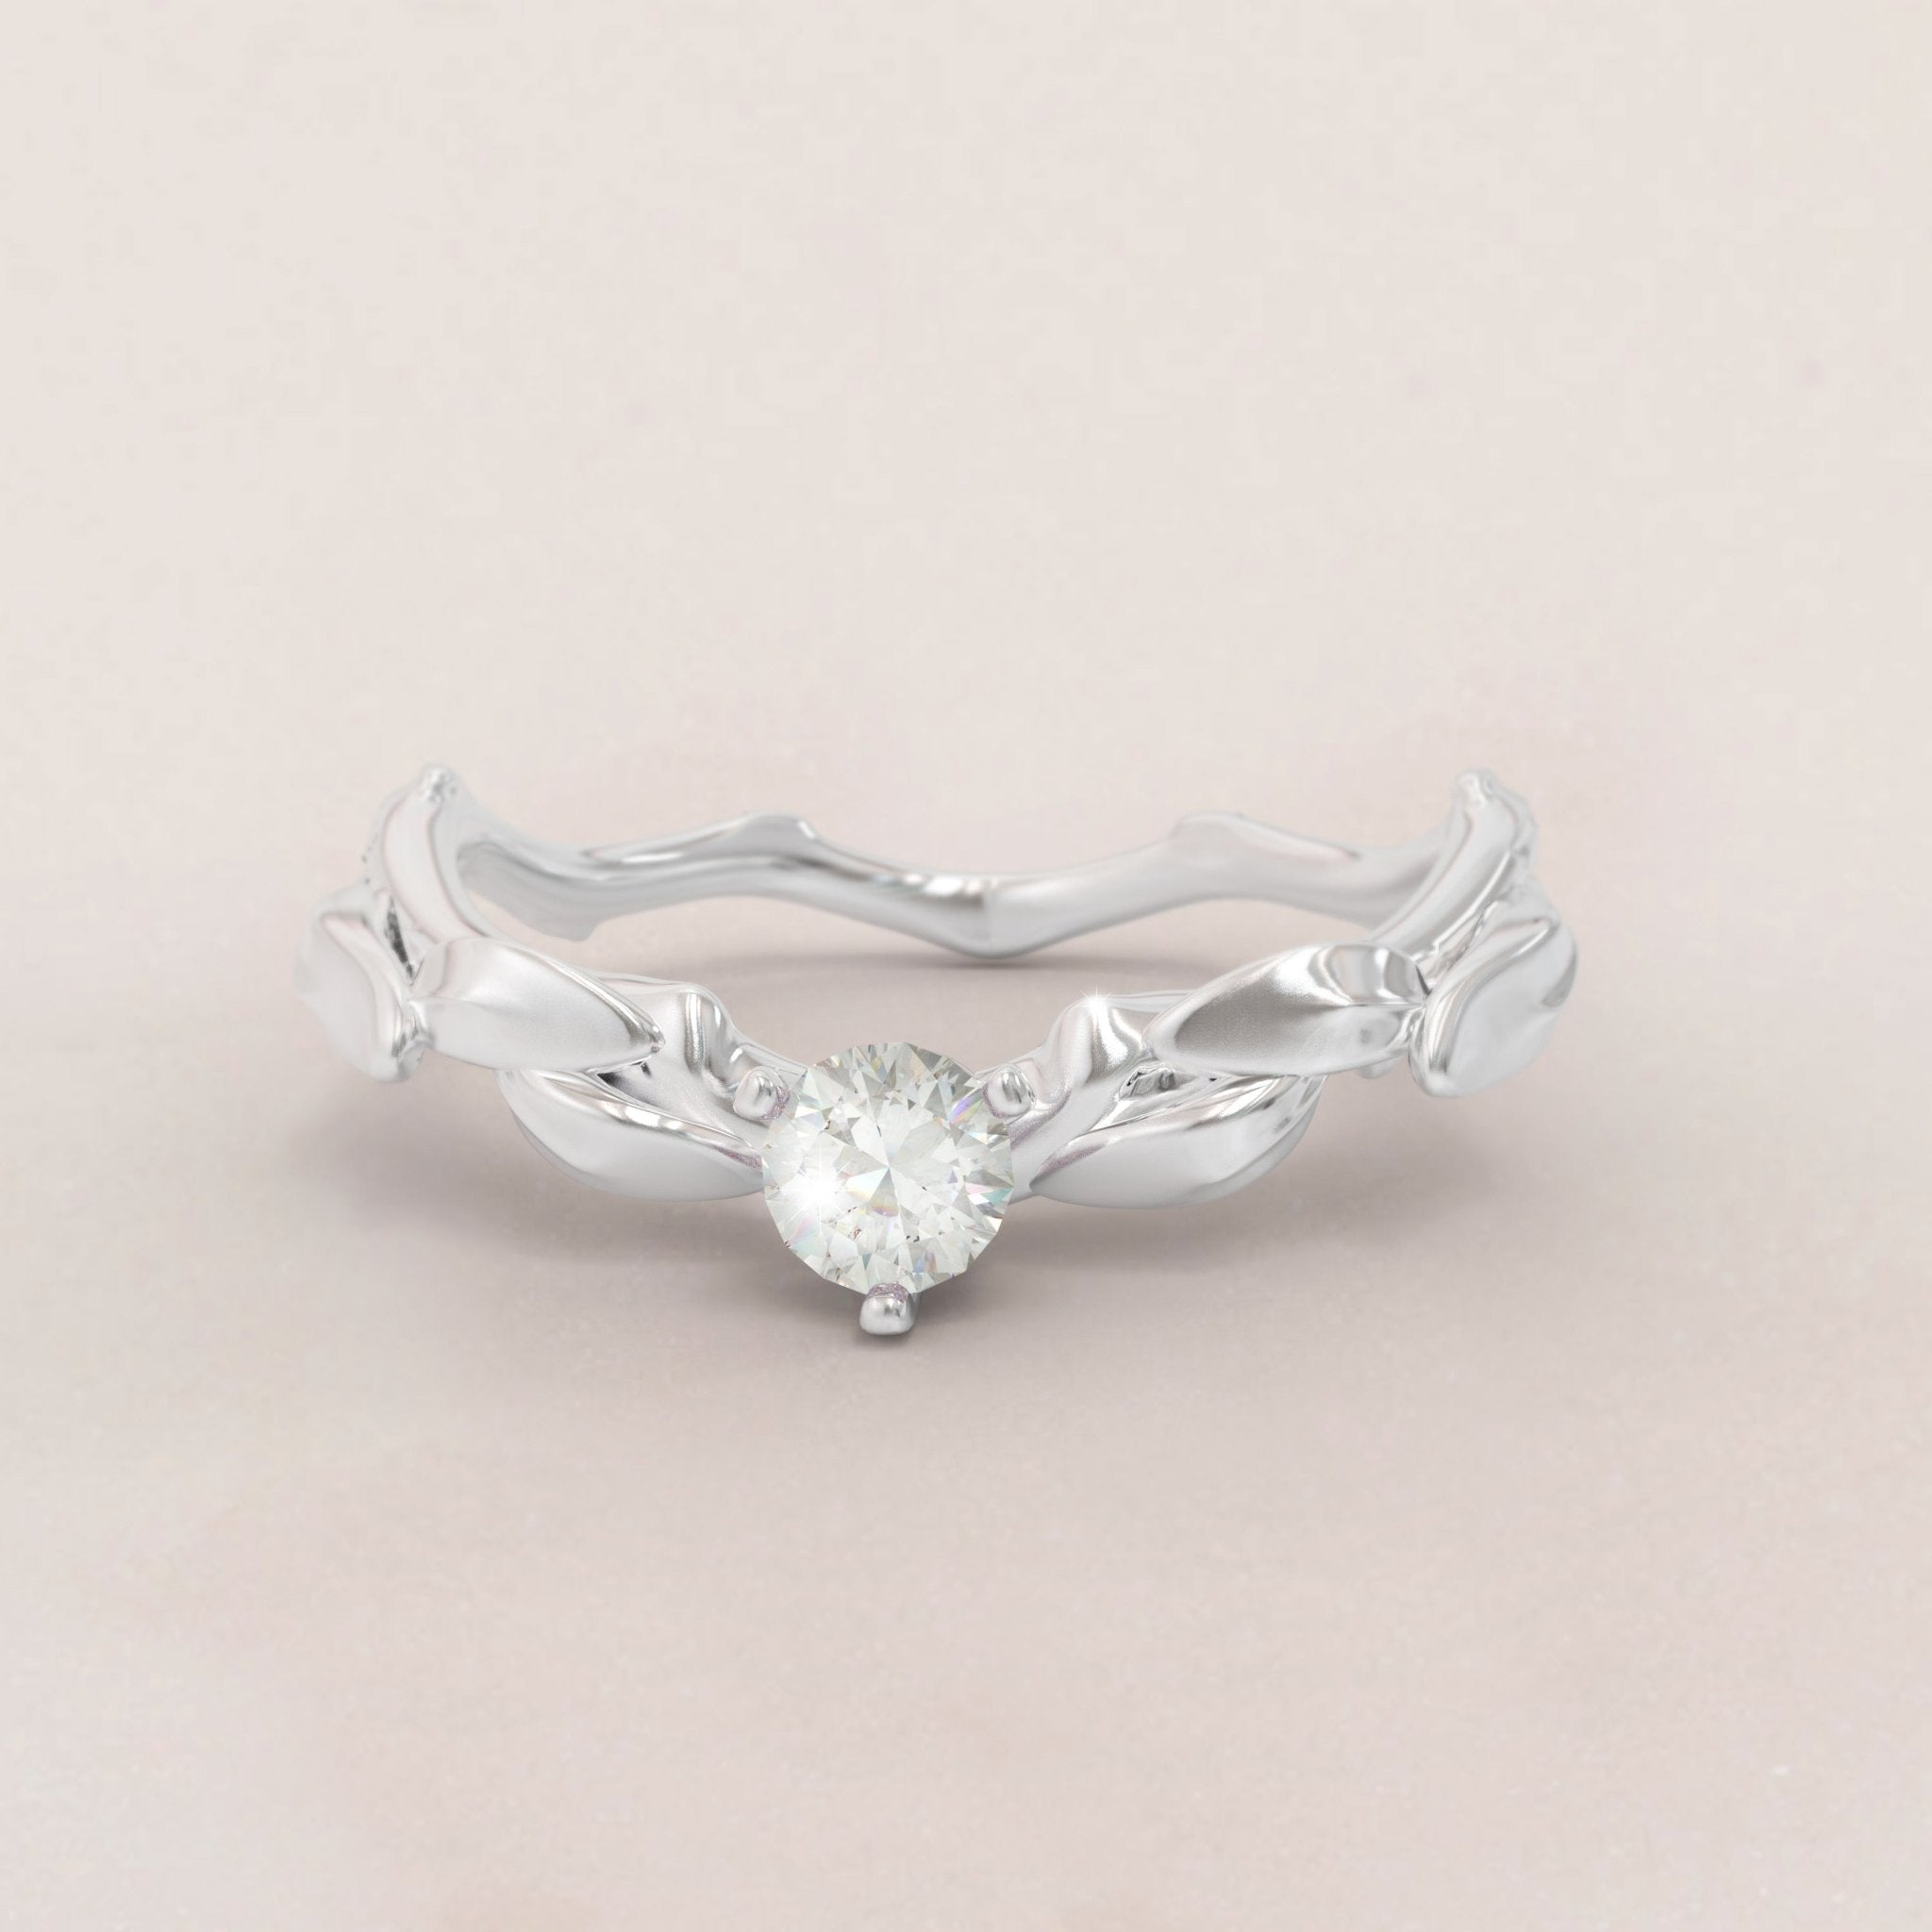 Unique Leaves Engagement Ring No.33 in White Gold - Moissanite - Roelavi